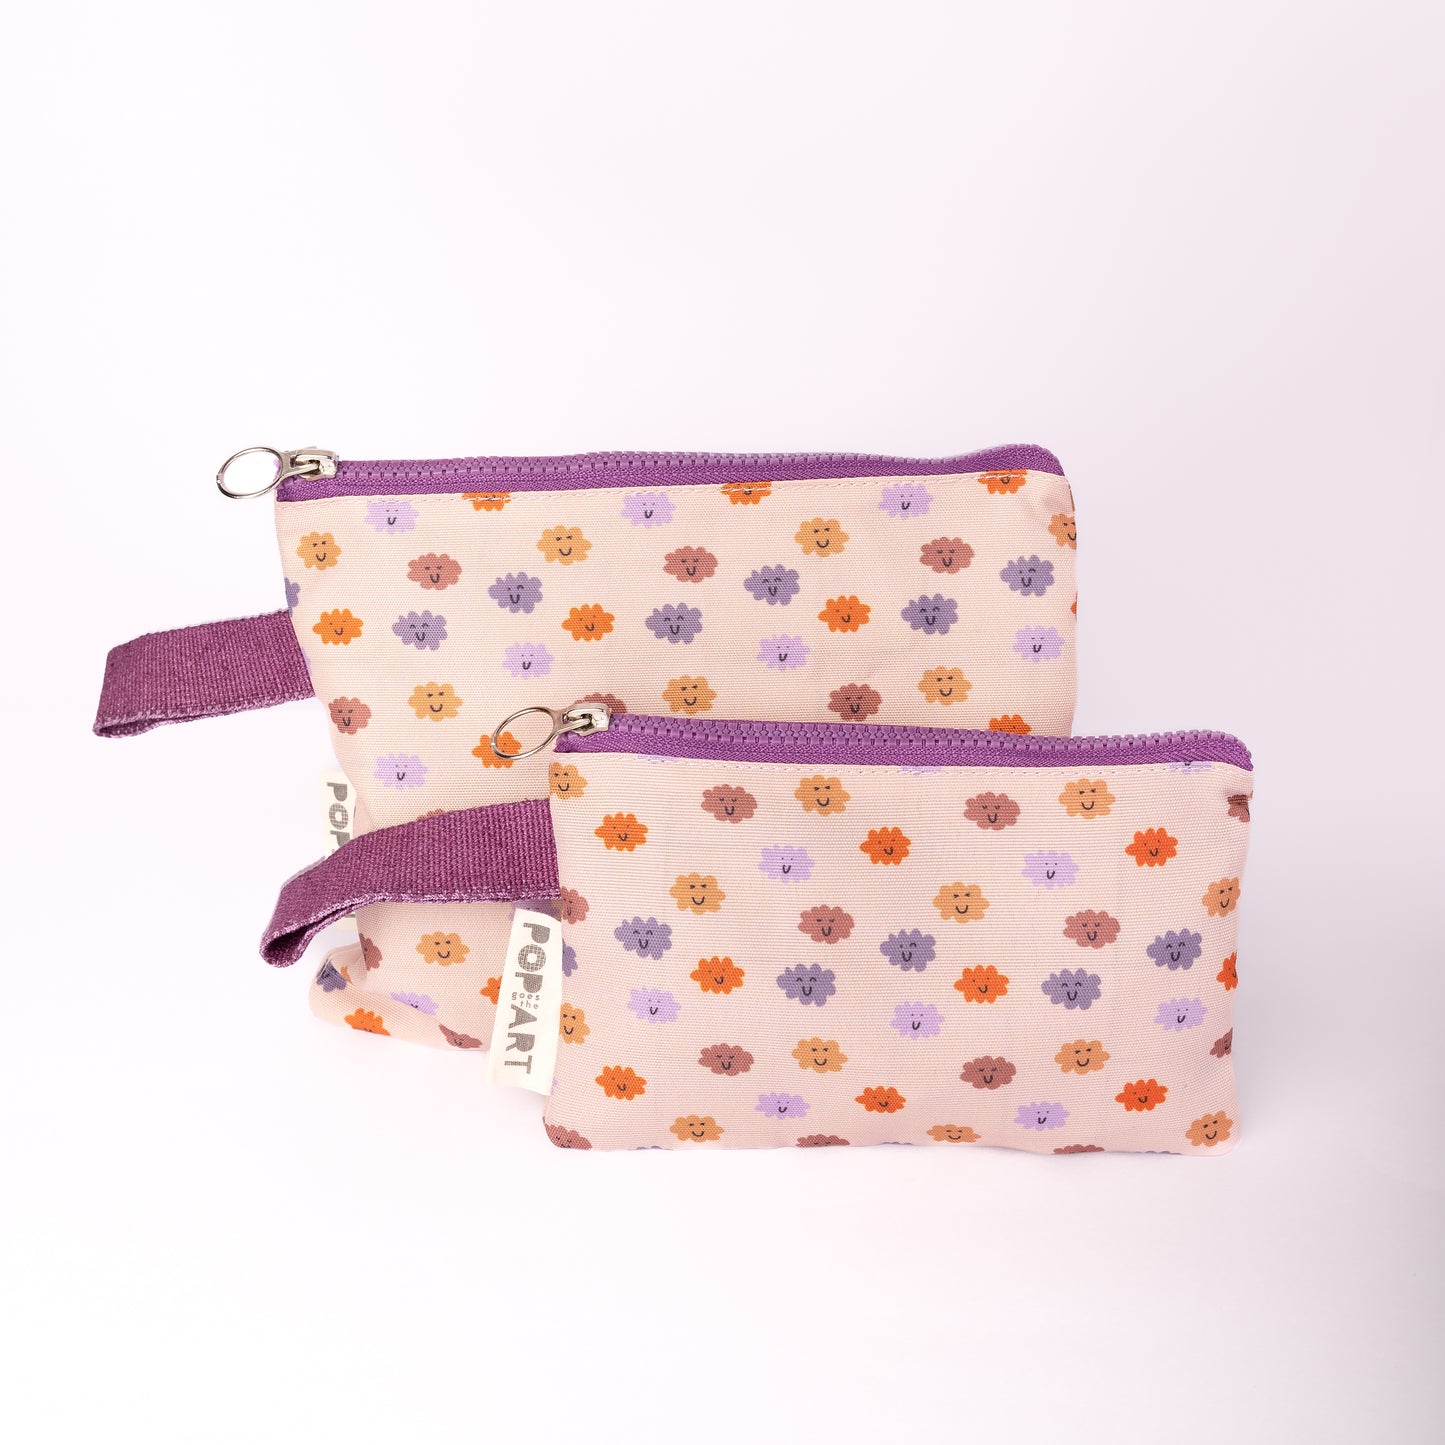 Pair of Pouches | Clouds